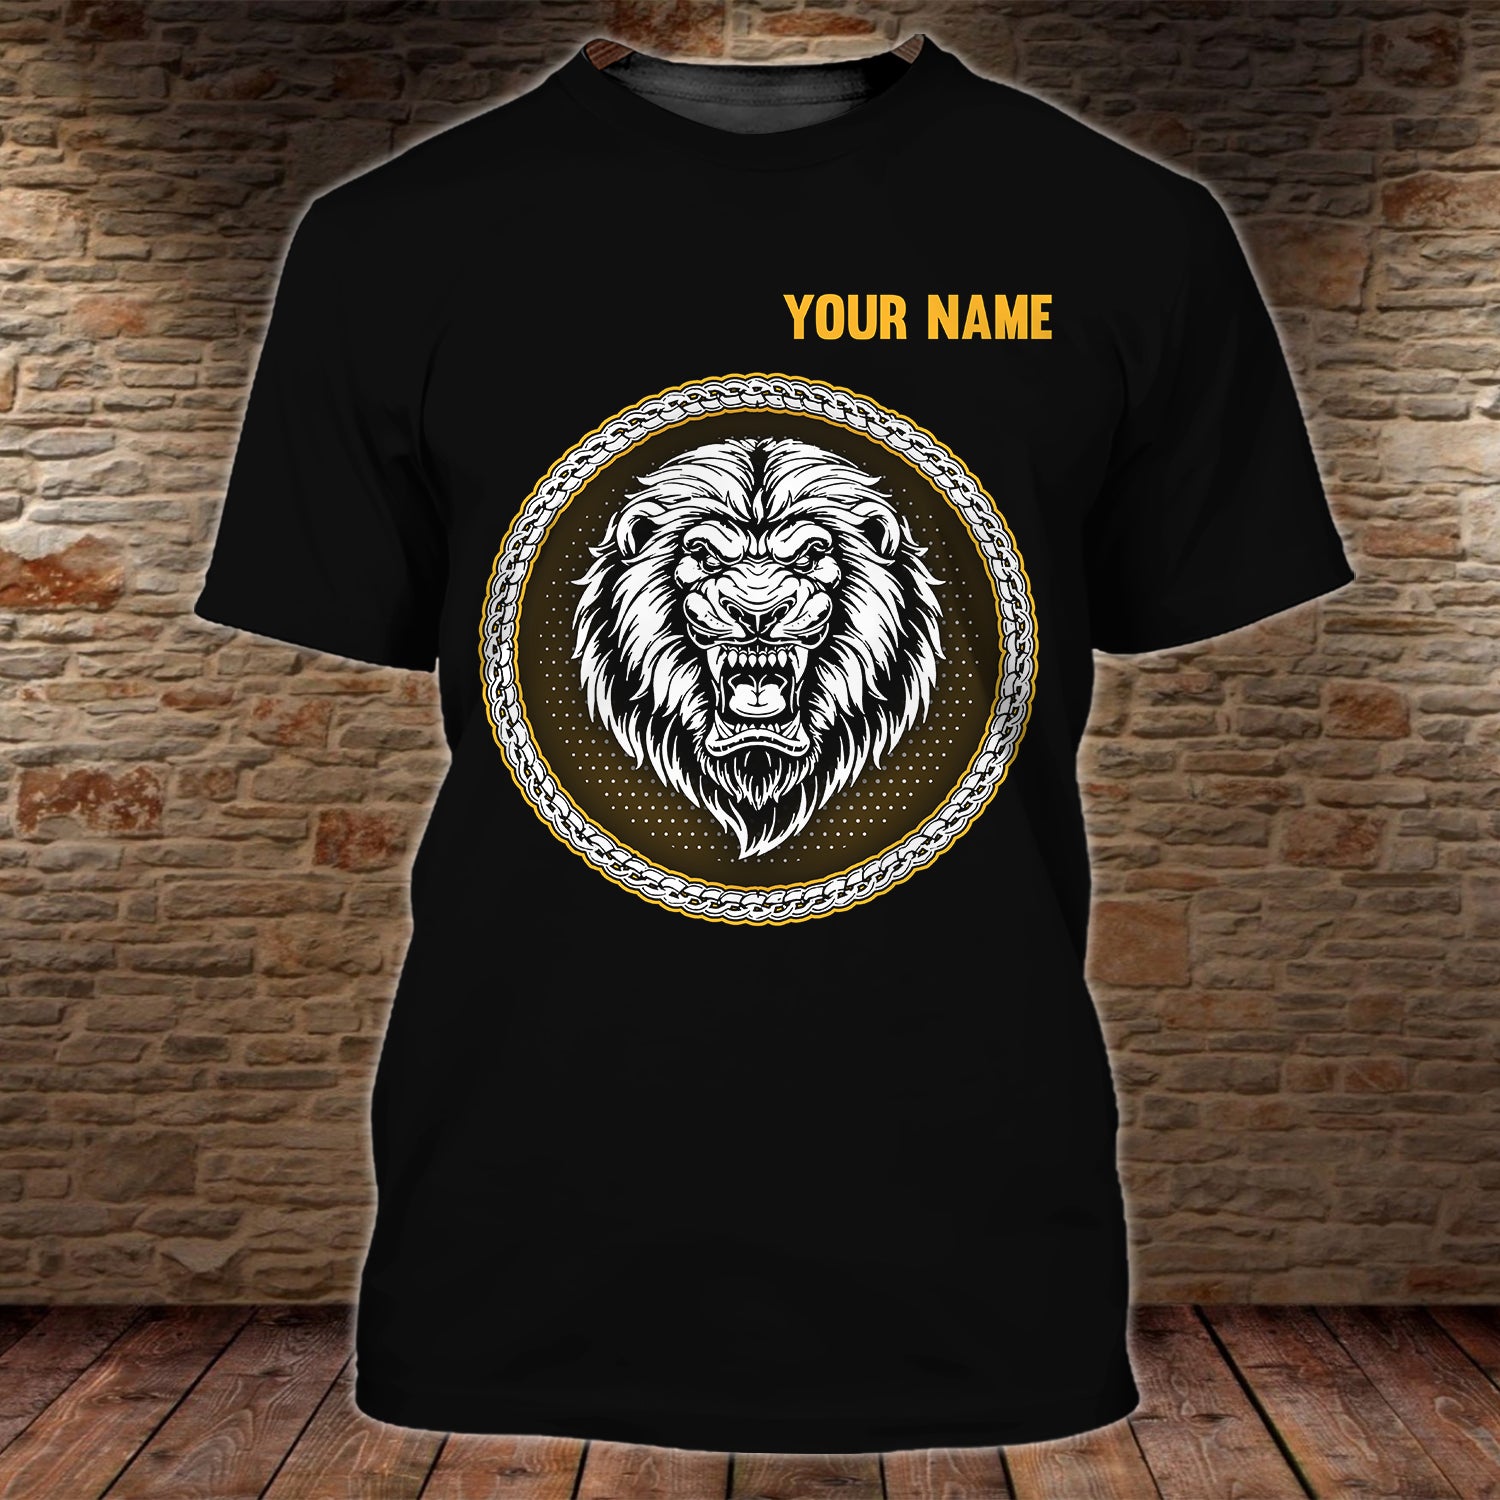 Kings Are Born In September - Personalized Name 3D Tshirt - Dah 22